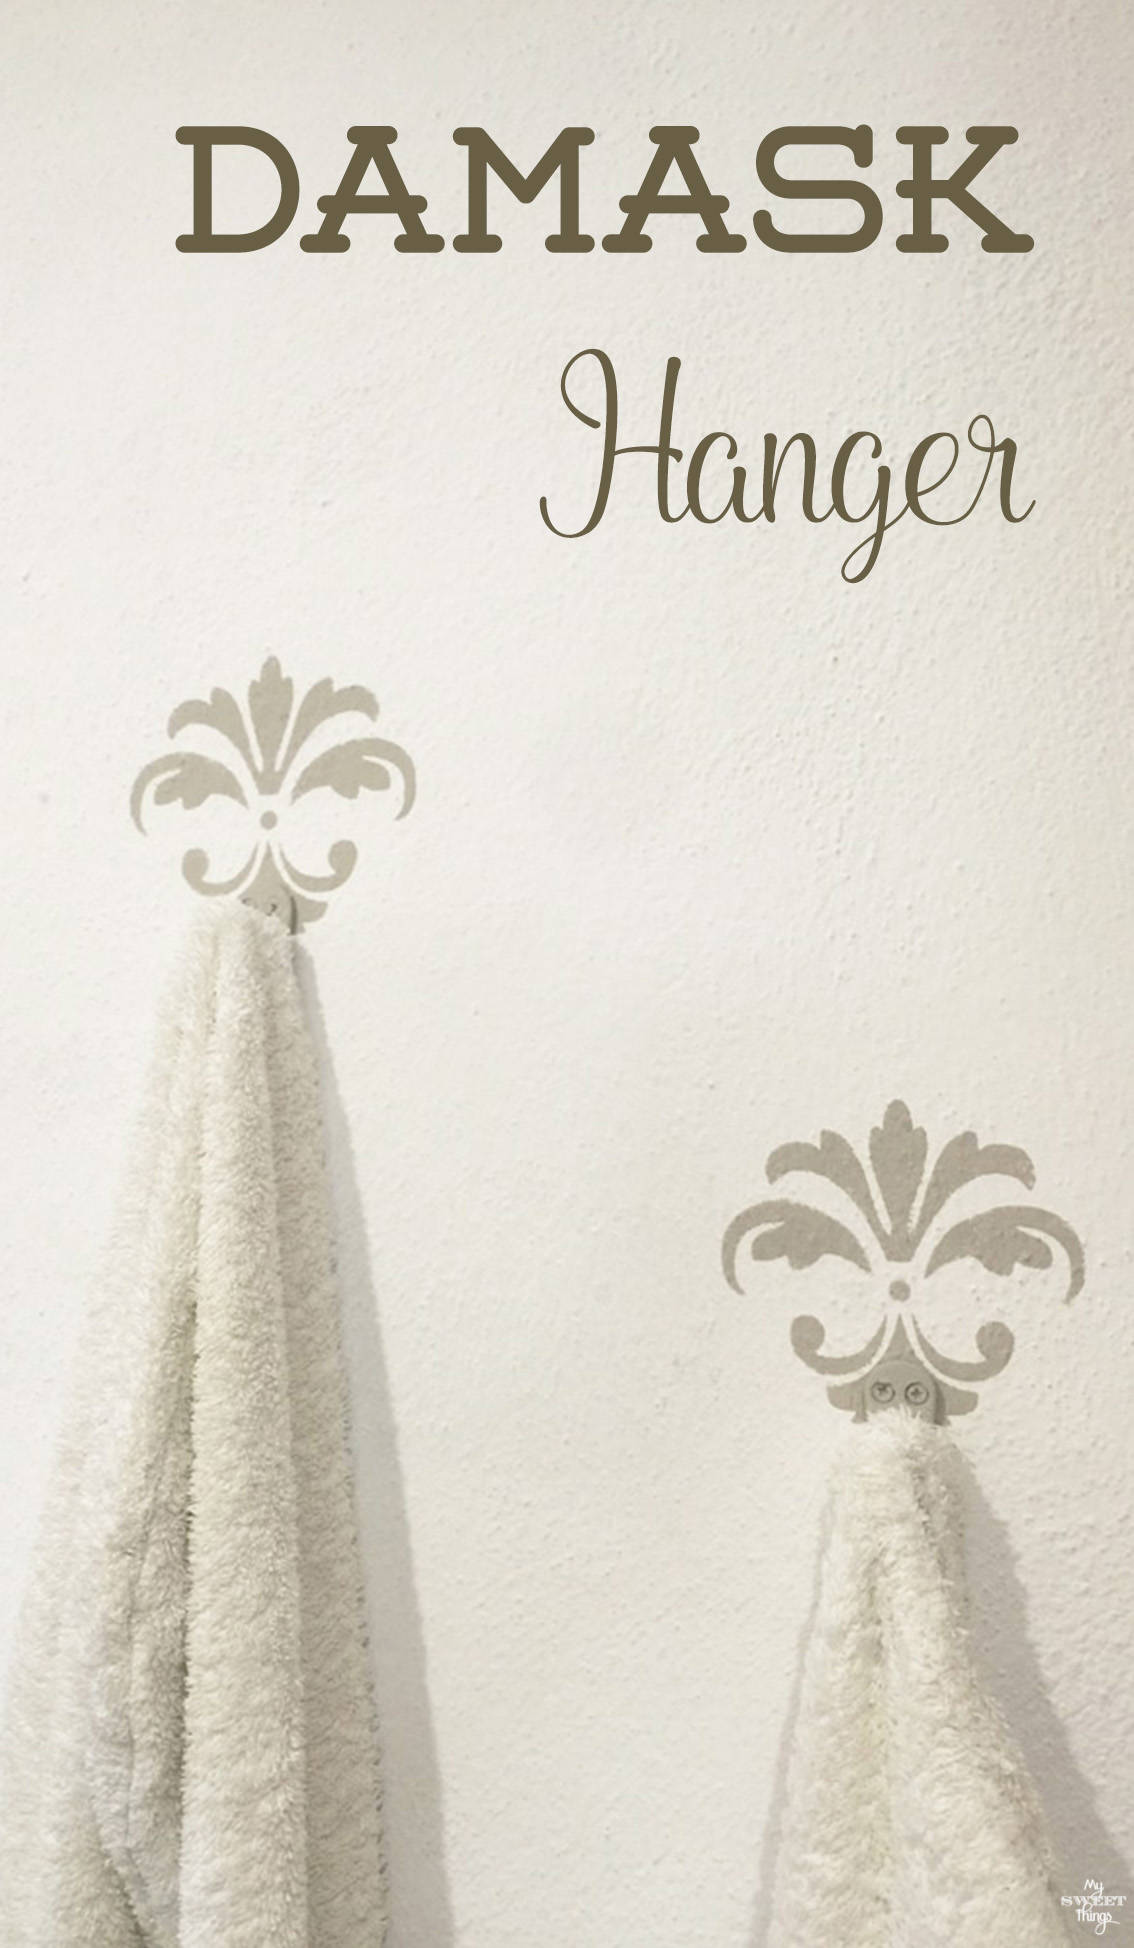 DIY damask hangers made with some paint and stencils